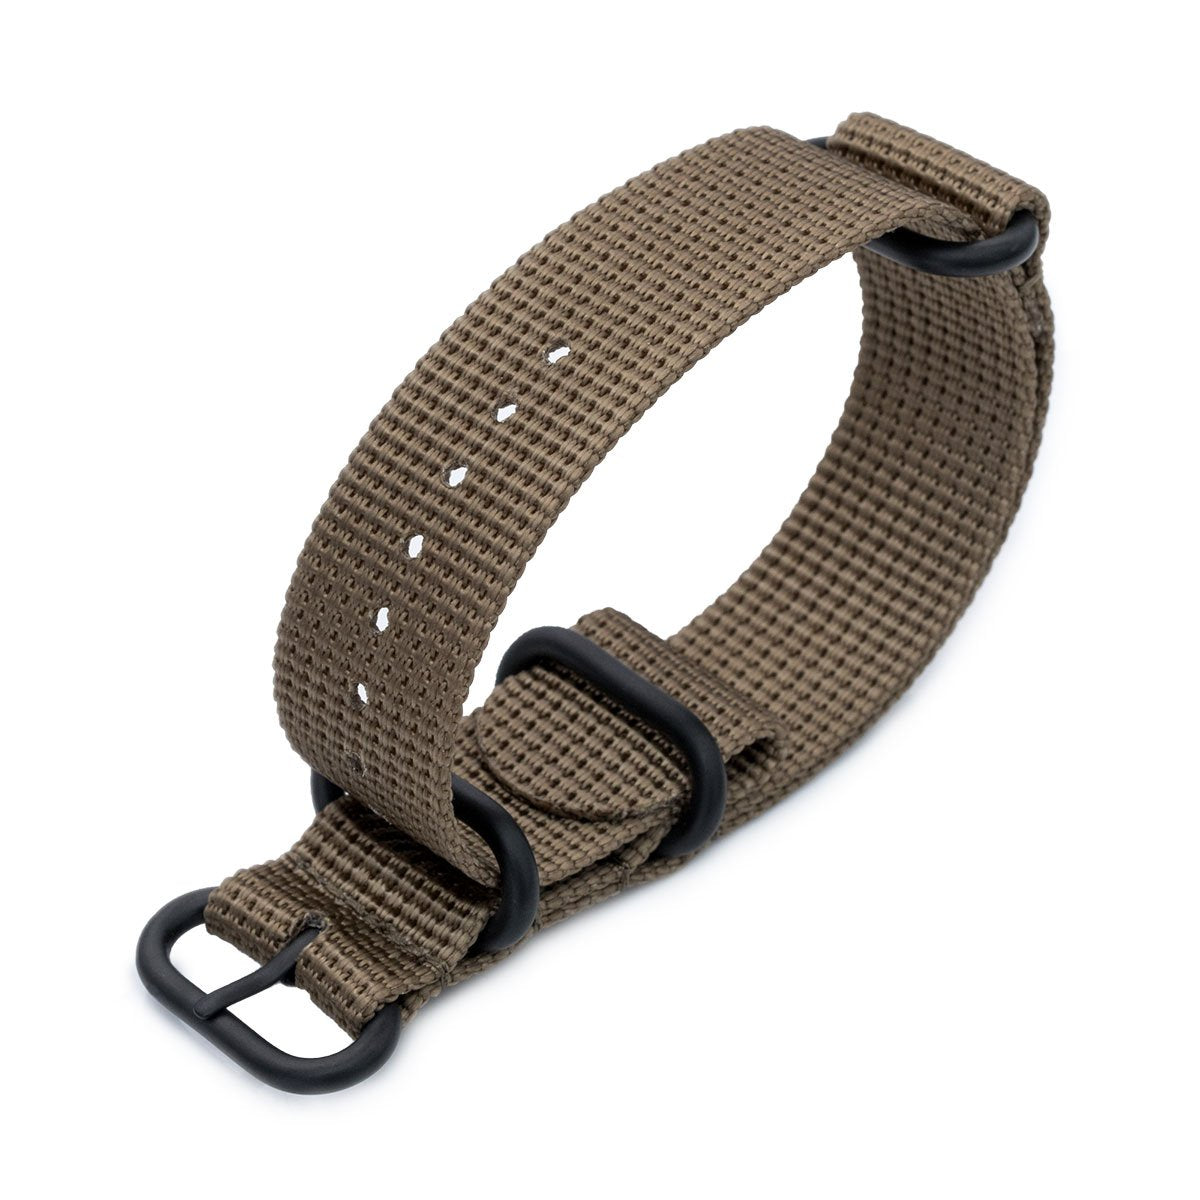 20mm 22mm or 24mm MiLTAT 3 Rings Zulu military watch strap 3D woven nylon armband Khaki PVD Black Hardware Strapcode Watch Bands